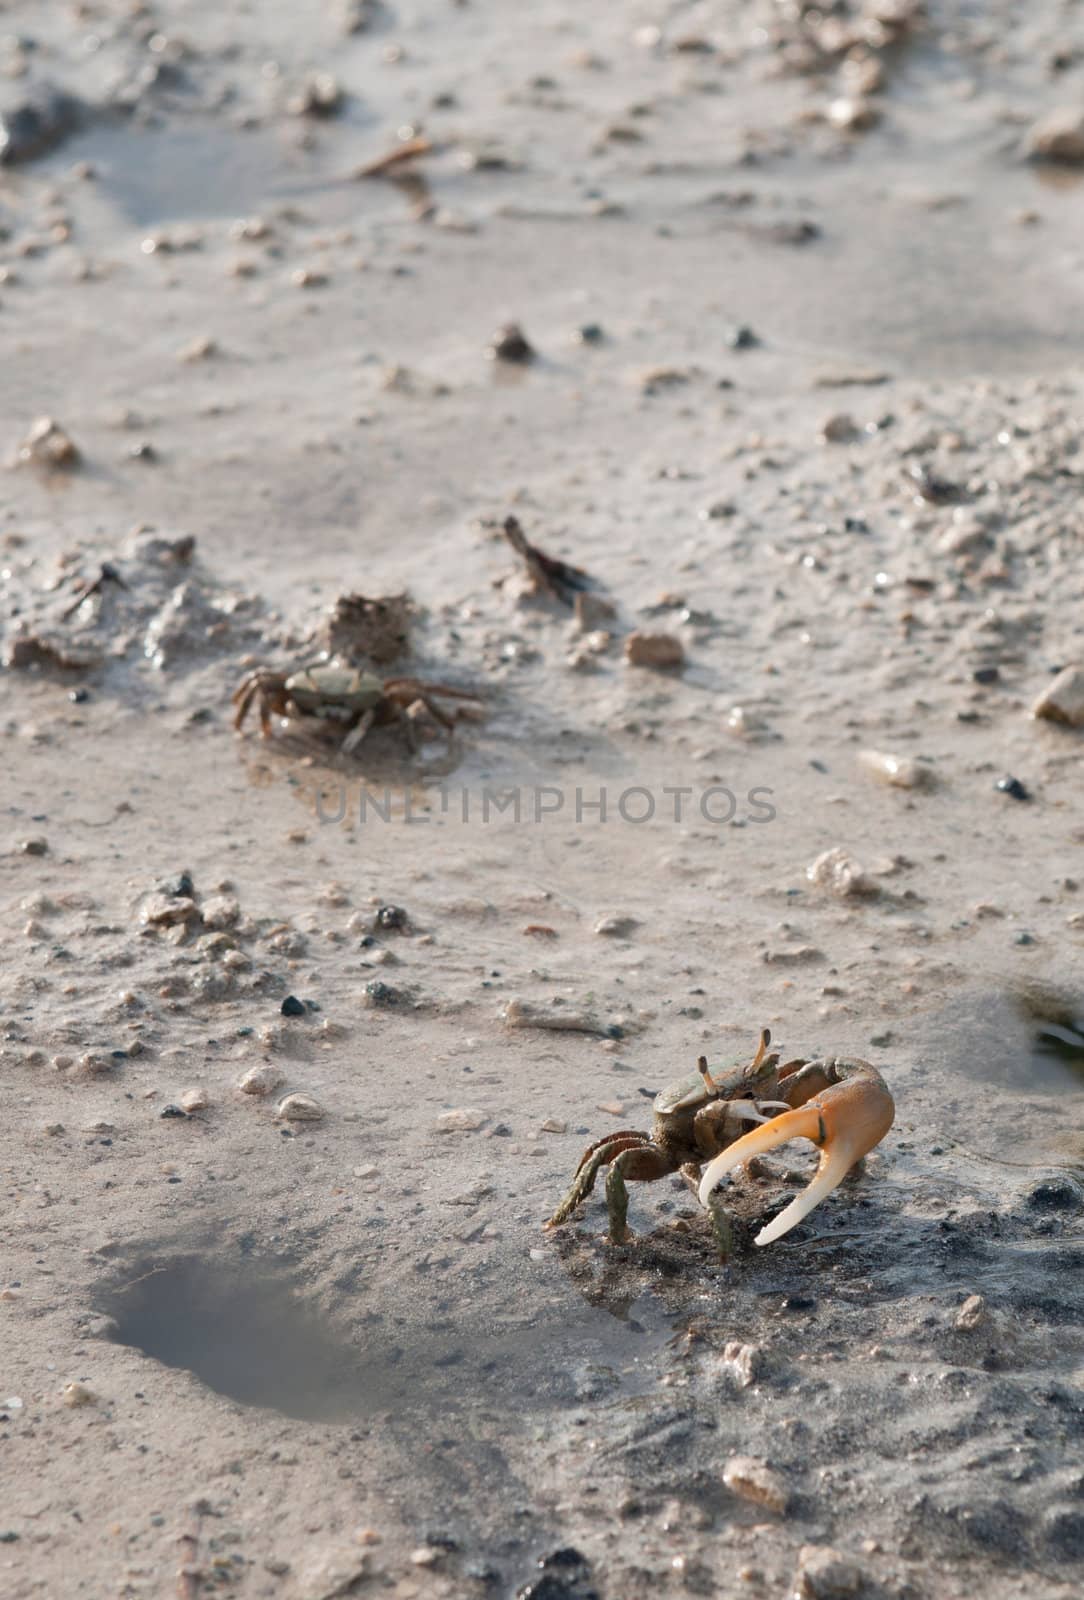 Crab protecting hole by luissantos84